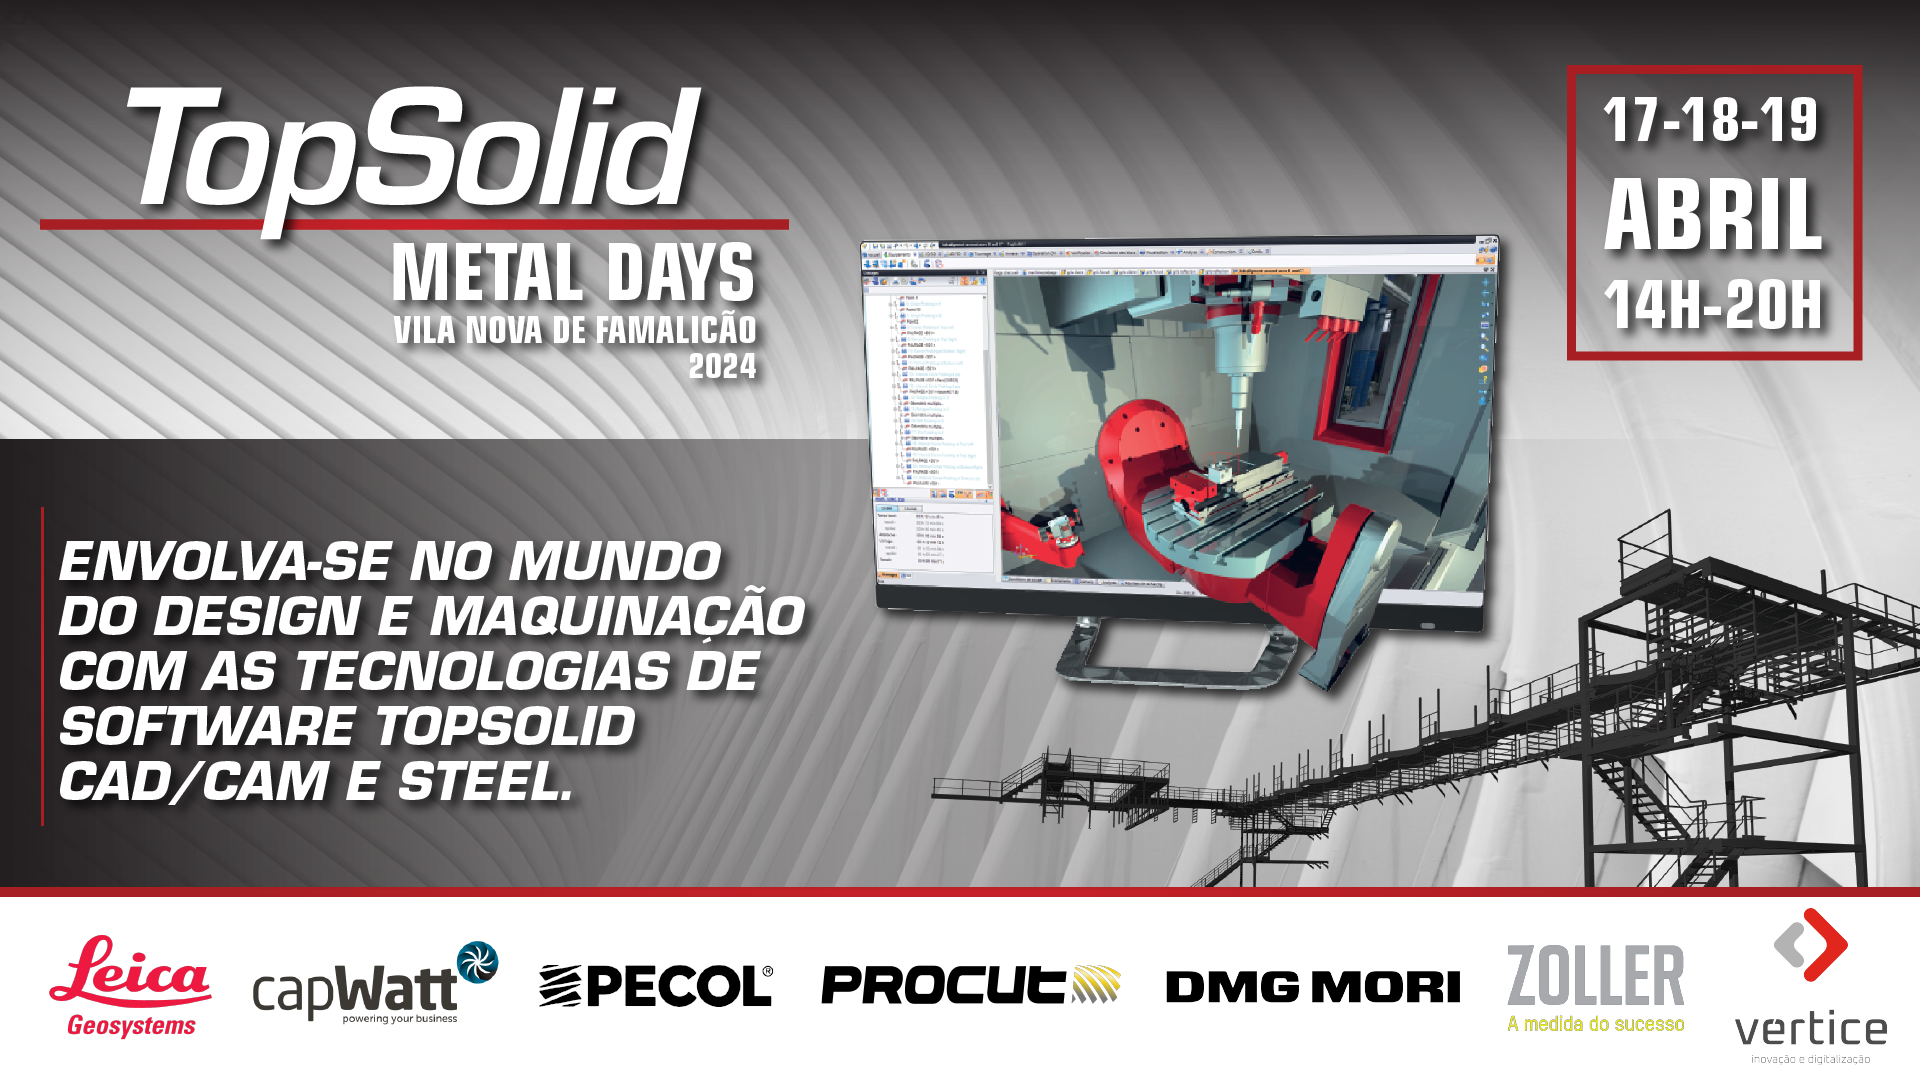 Topsolid User Day 2020